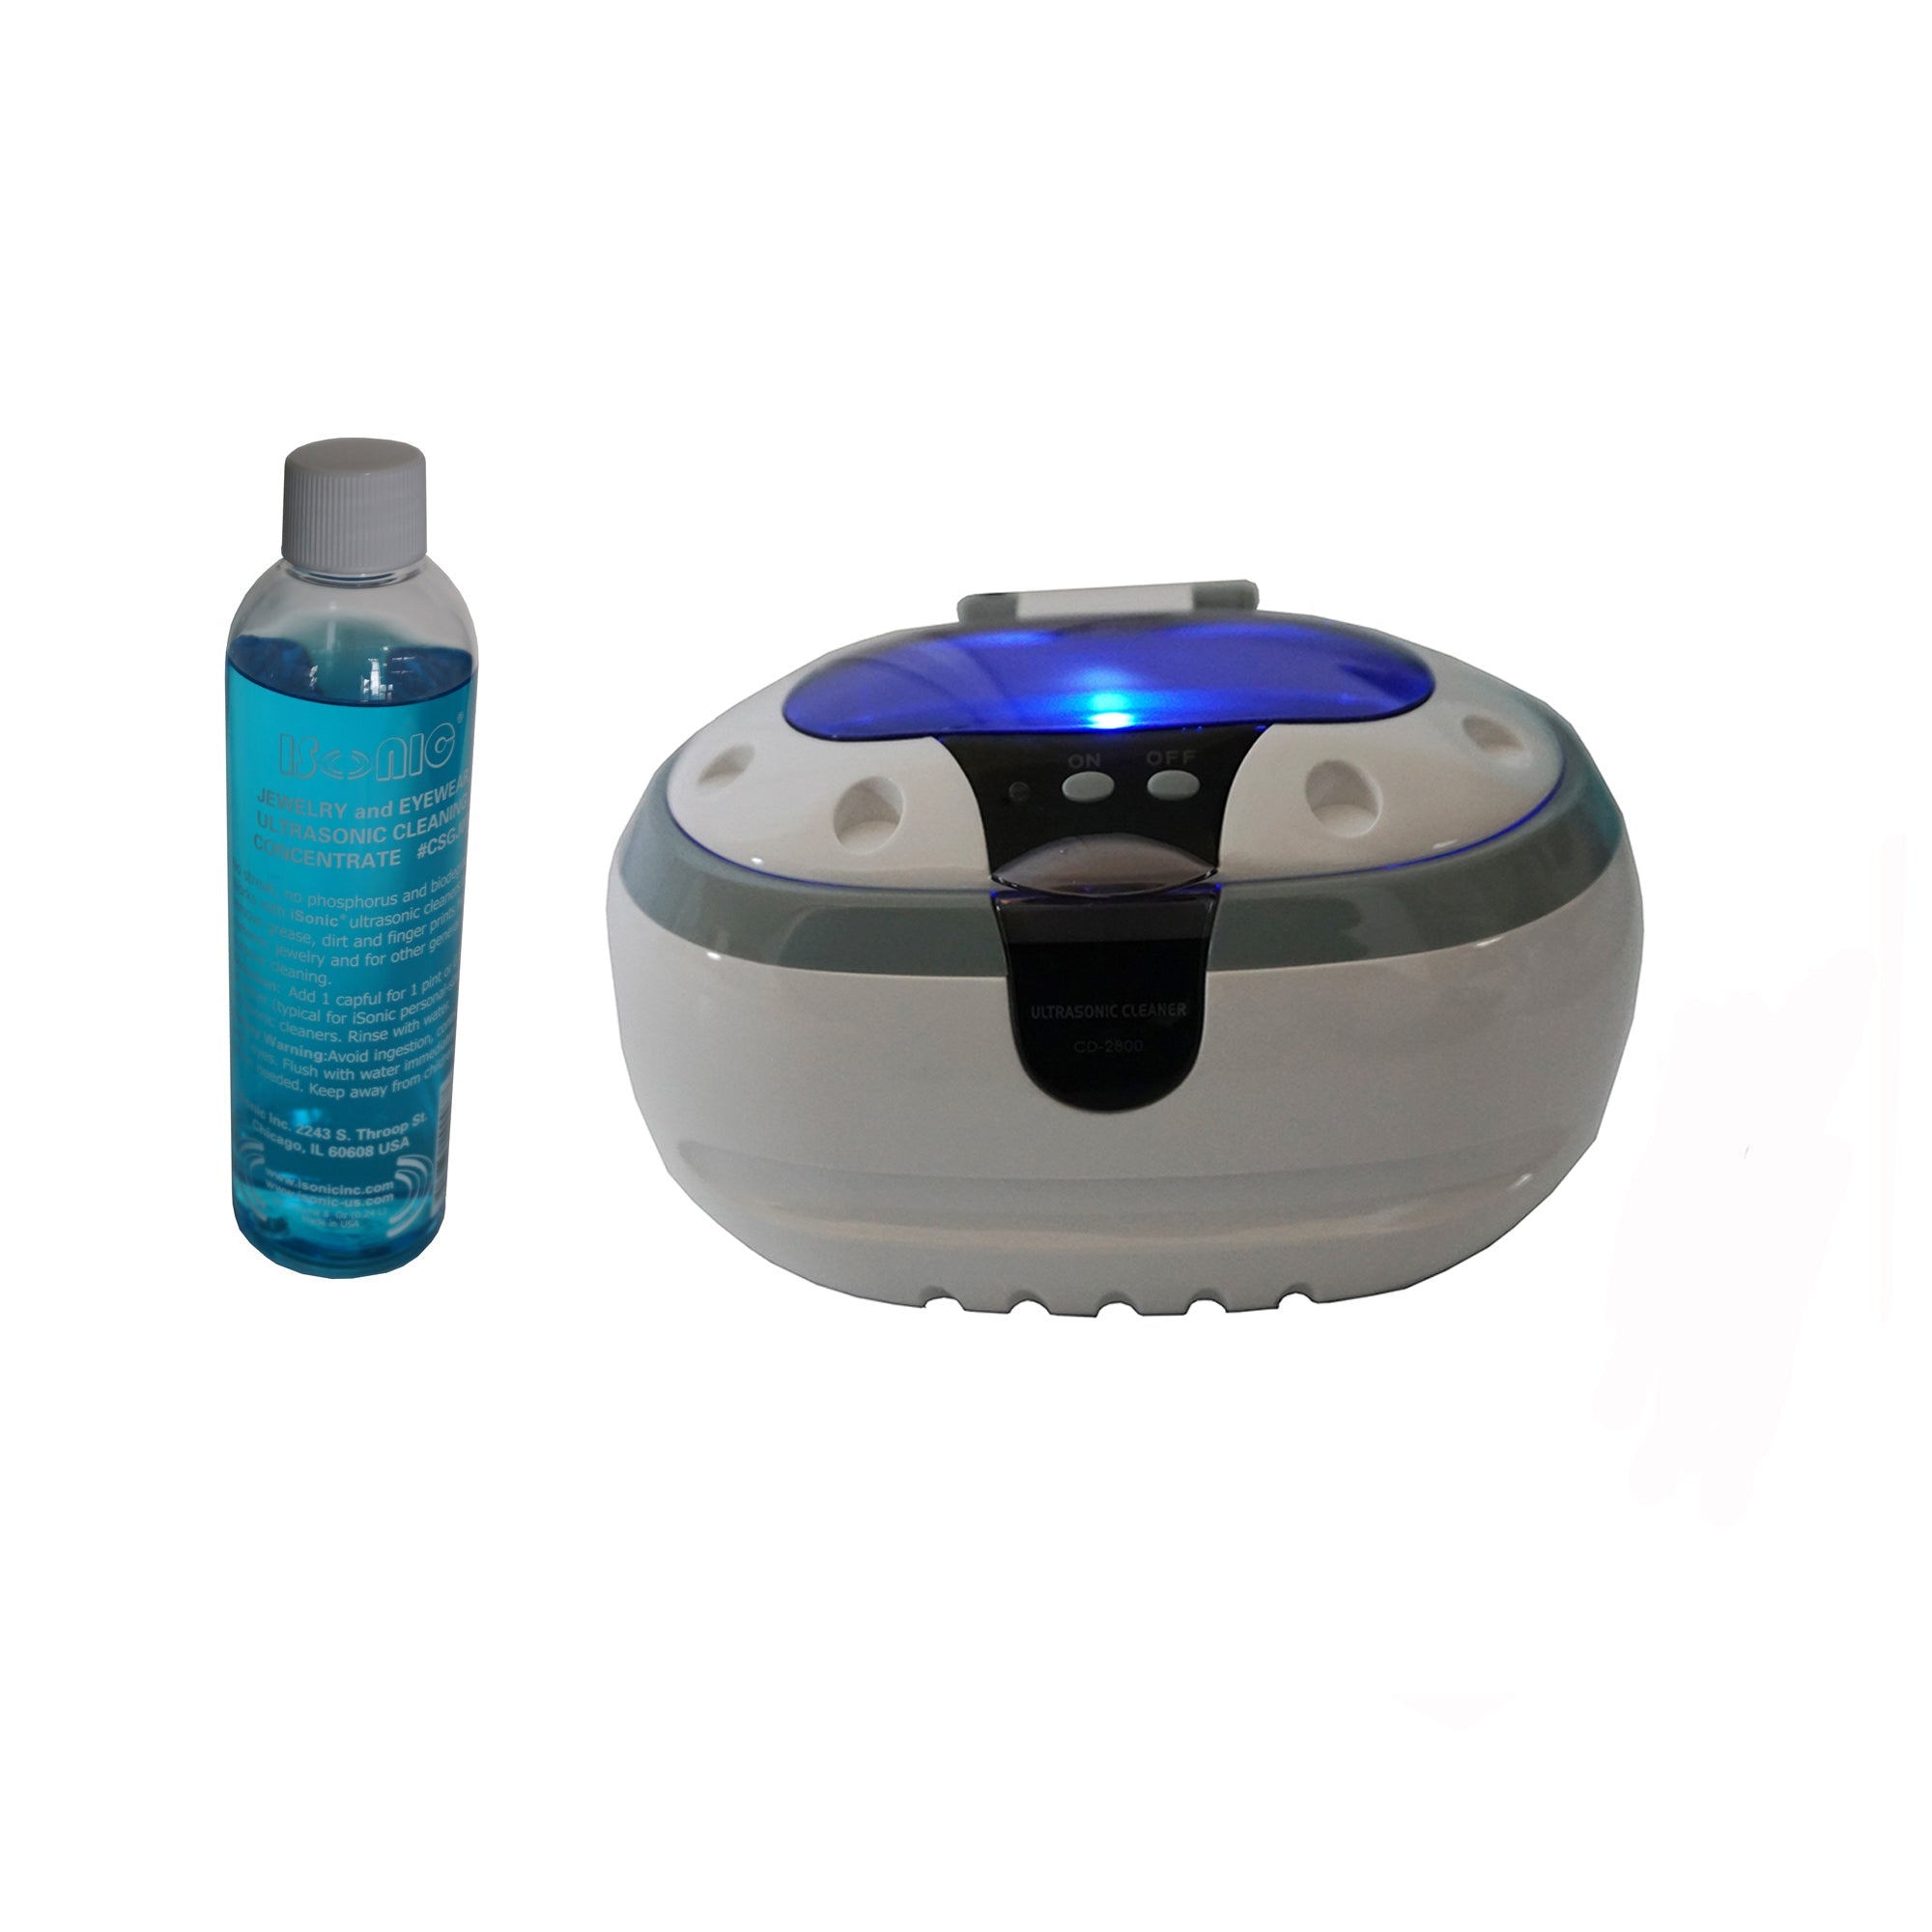 CD2800 (almost new)+CSGJ01 | iSonic? Personal Ultrasonic Cleaner with Jewelry/Eyewear Cleaning Solution Concentrate CSGJ01, 8OZ